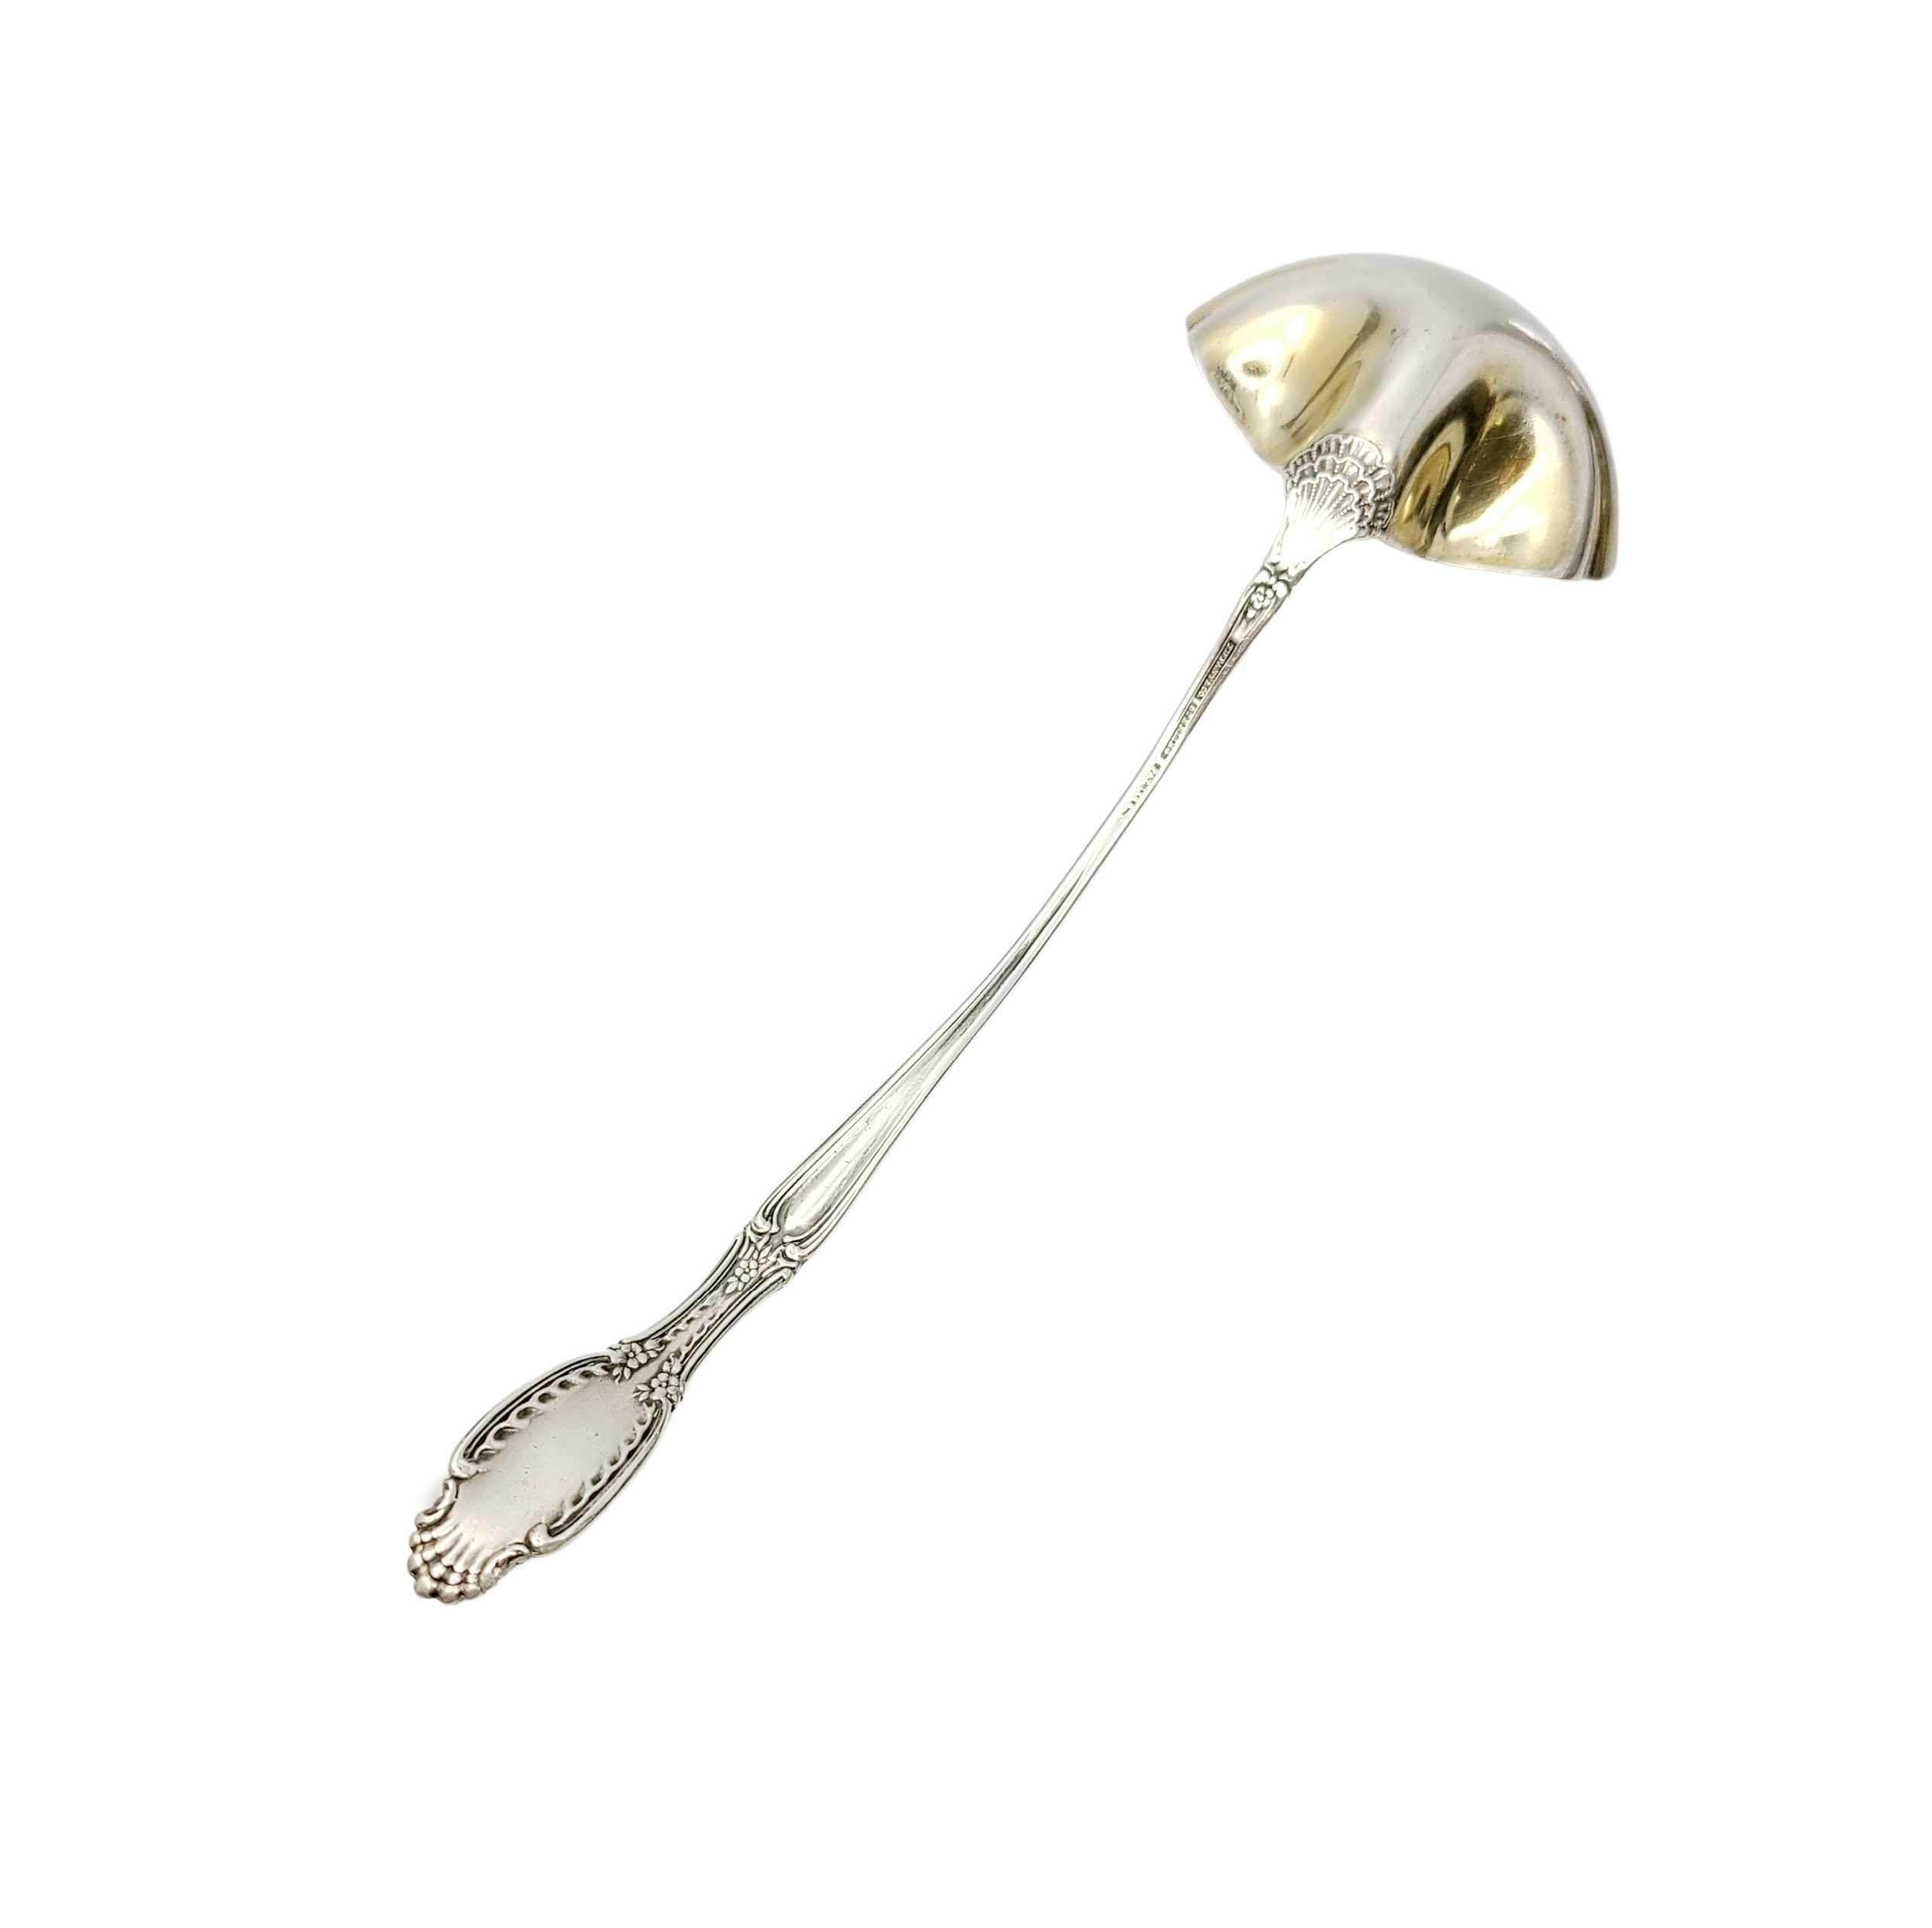 Antique Tiffany & Co. sterling silver cream ladle in the Richelieu pattern.

The Richelieu pattern was designed in 1892 by Paulding Farnham, Tiffany's chief designer of the time. This piece features a fluted, gold washed bowl. The T mark dates